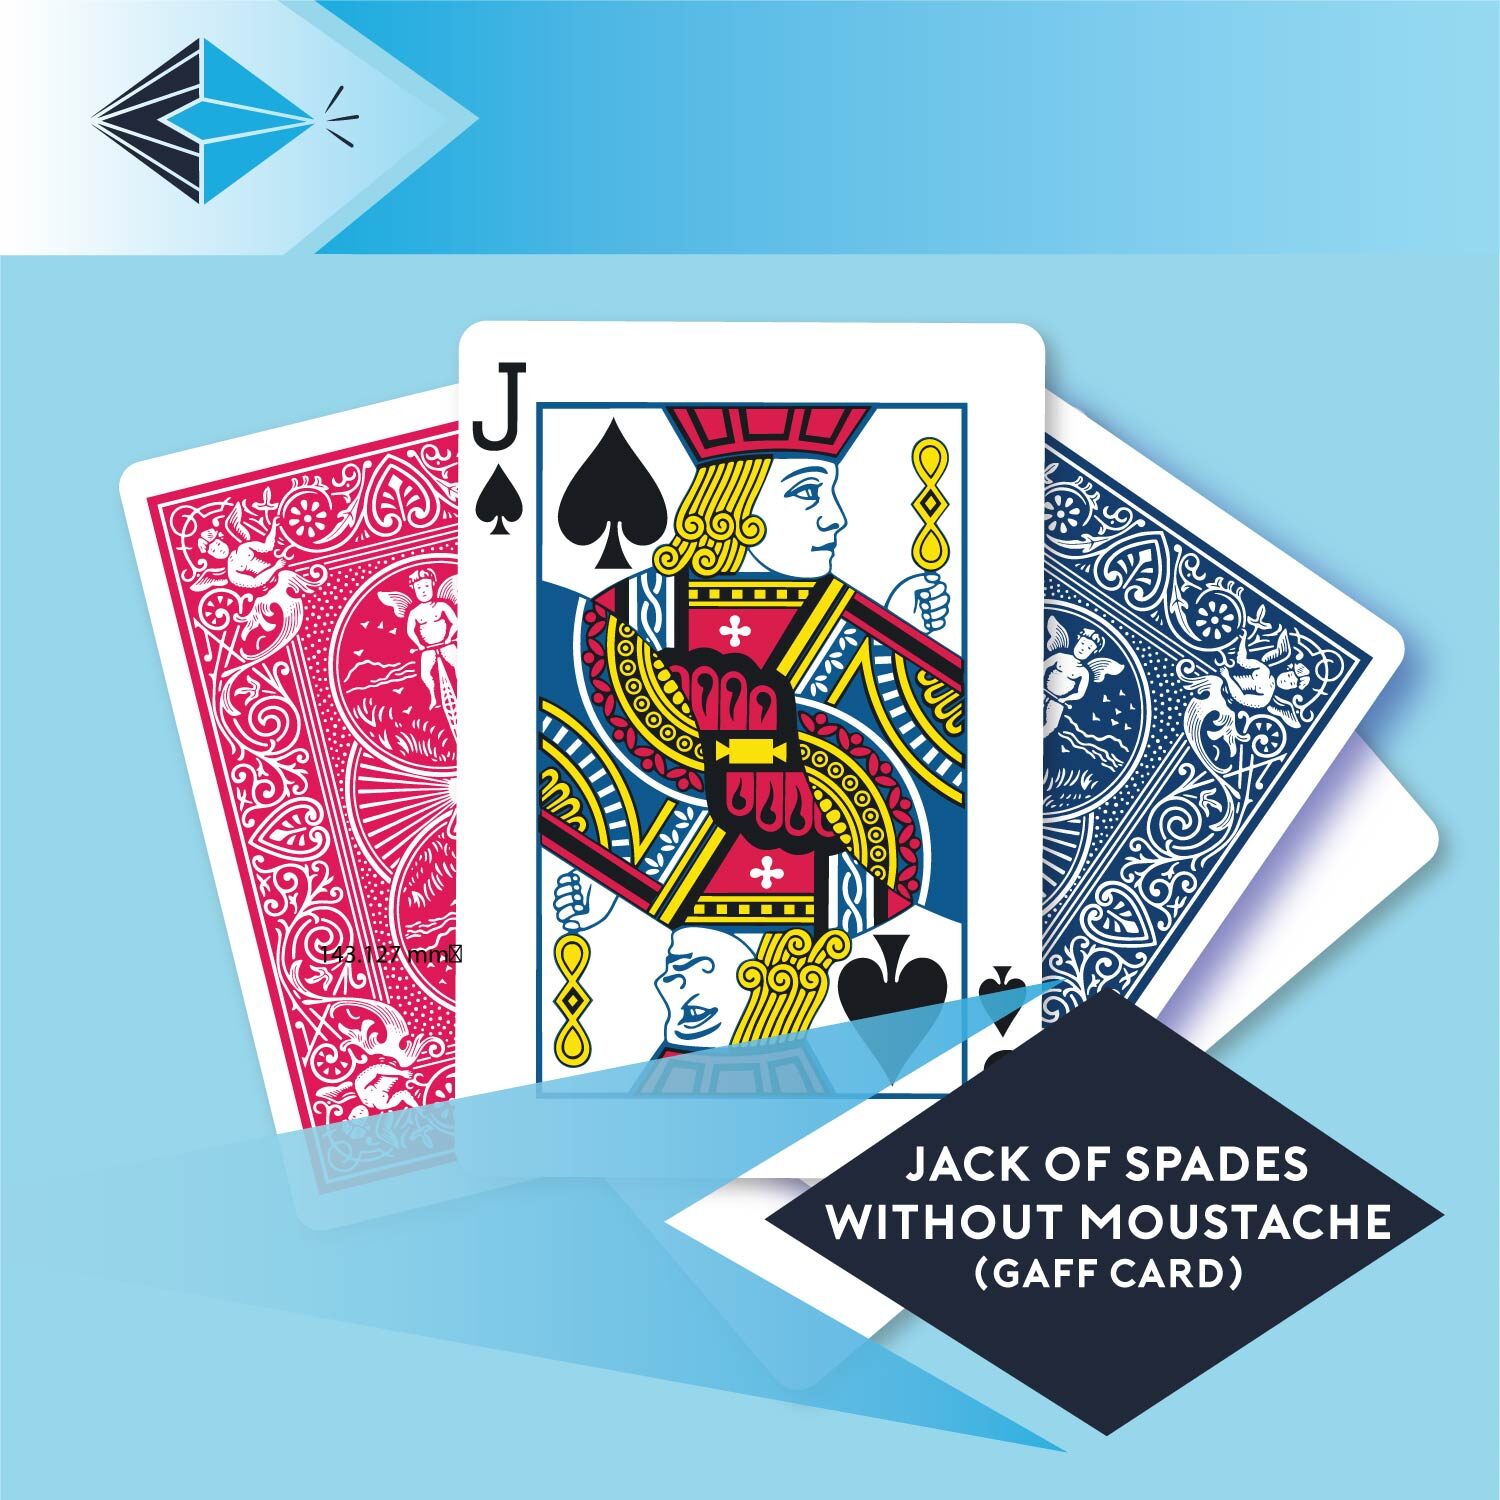 jack of spades without moustache gaff card 7 printbymagic magicians gaff cards printers Stockport Manchester UK